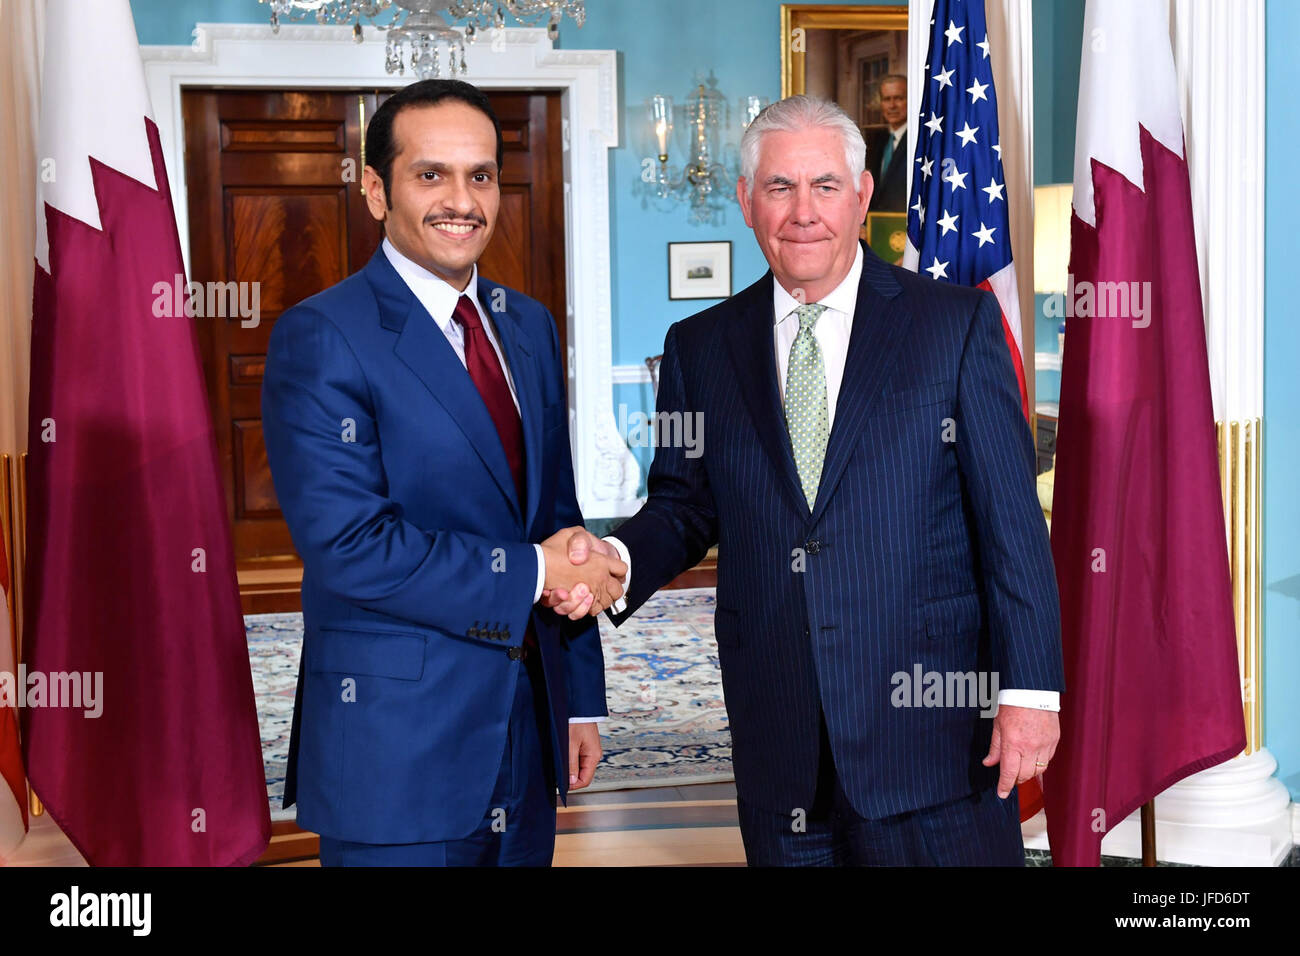 U.S. Secretary of State Rex Tillerson poses for a photo with Qatari Foreign Minister Sheikh Mohammed bin Abdulrahman Al Thani before their meeting at the U.S. Department of State in Washington, D.C., on June 27, 2017. Stock Photo